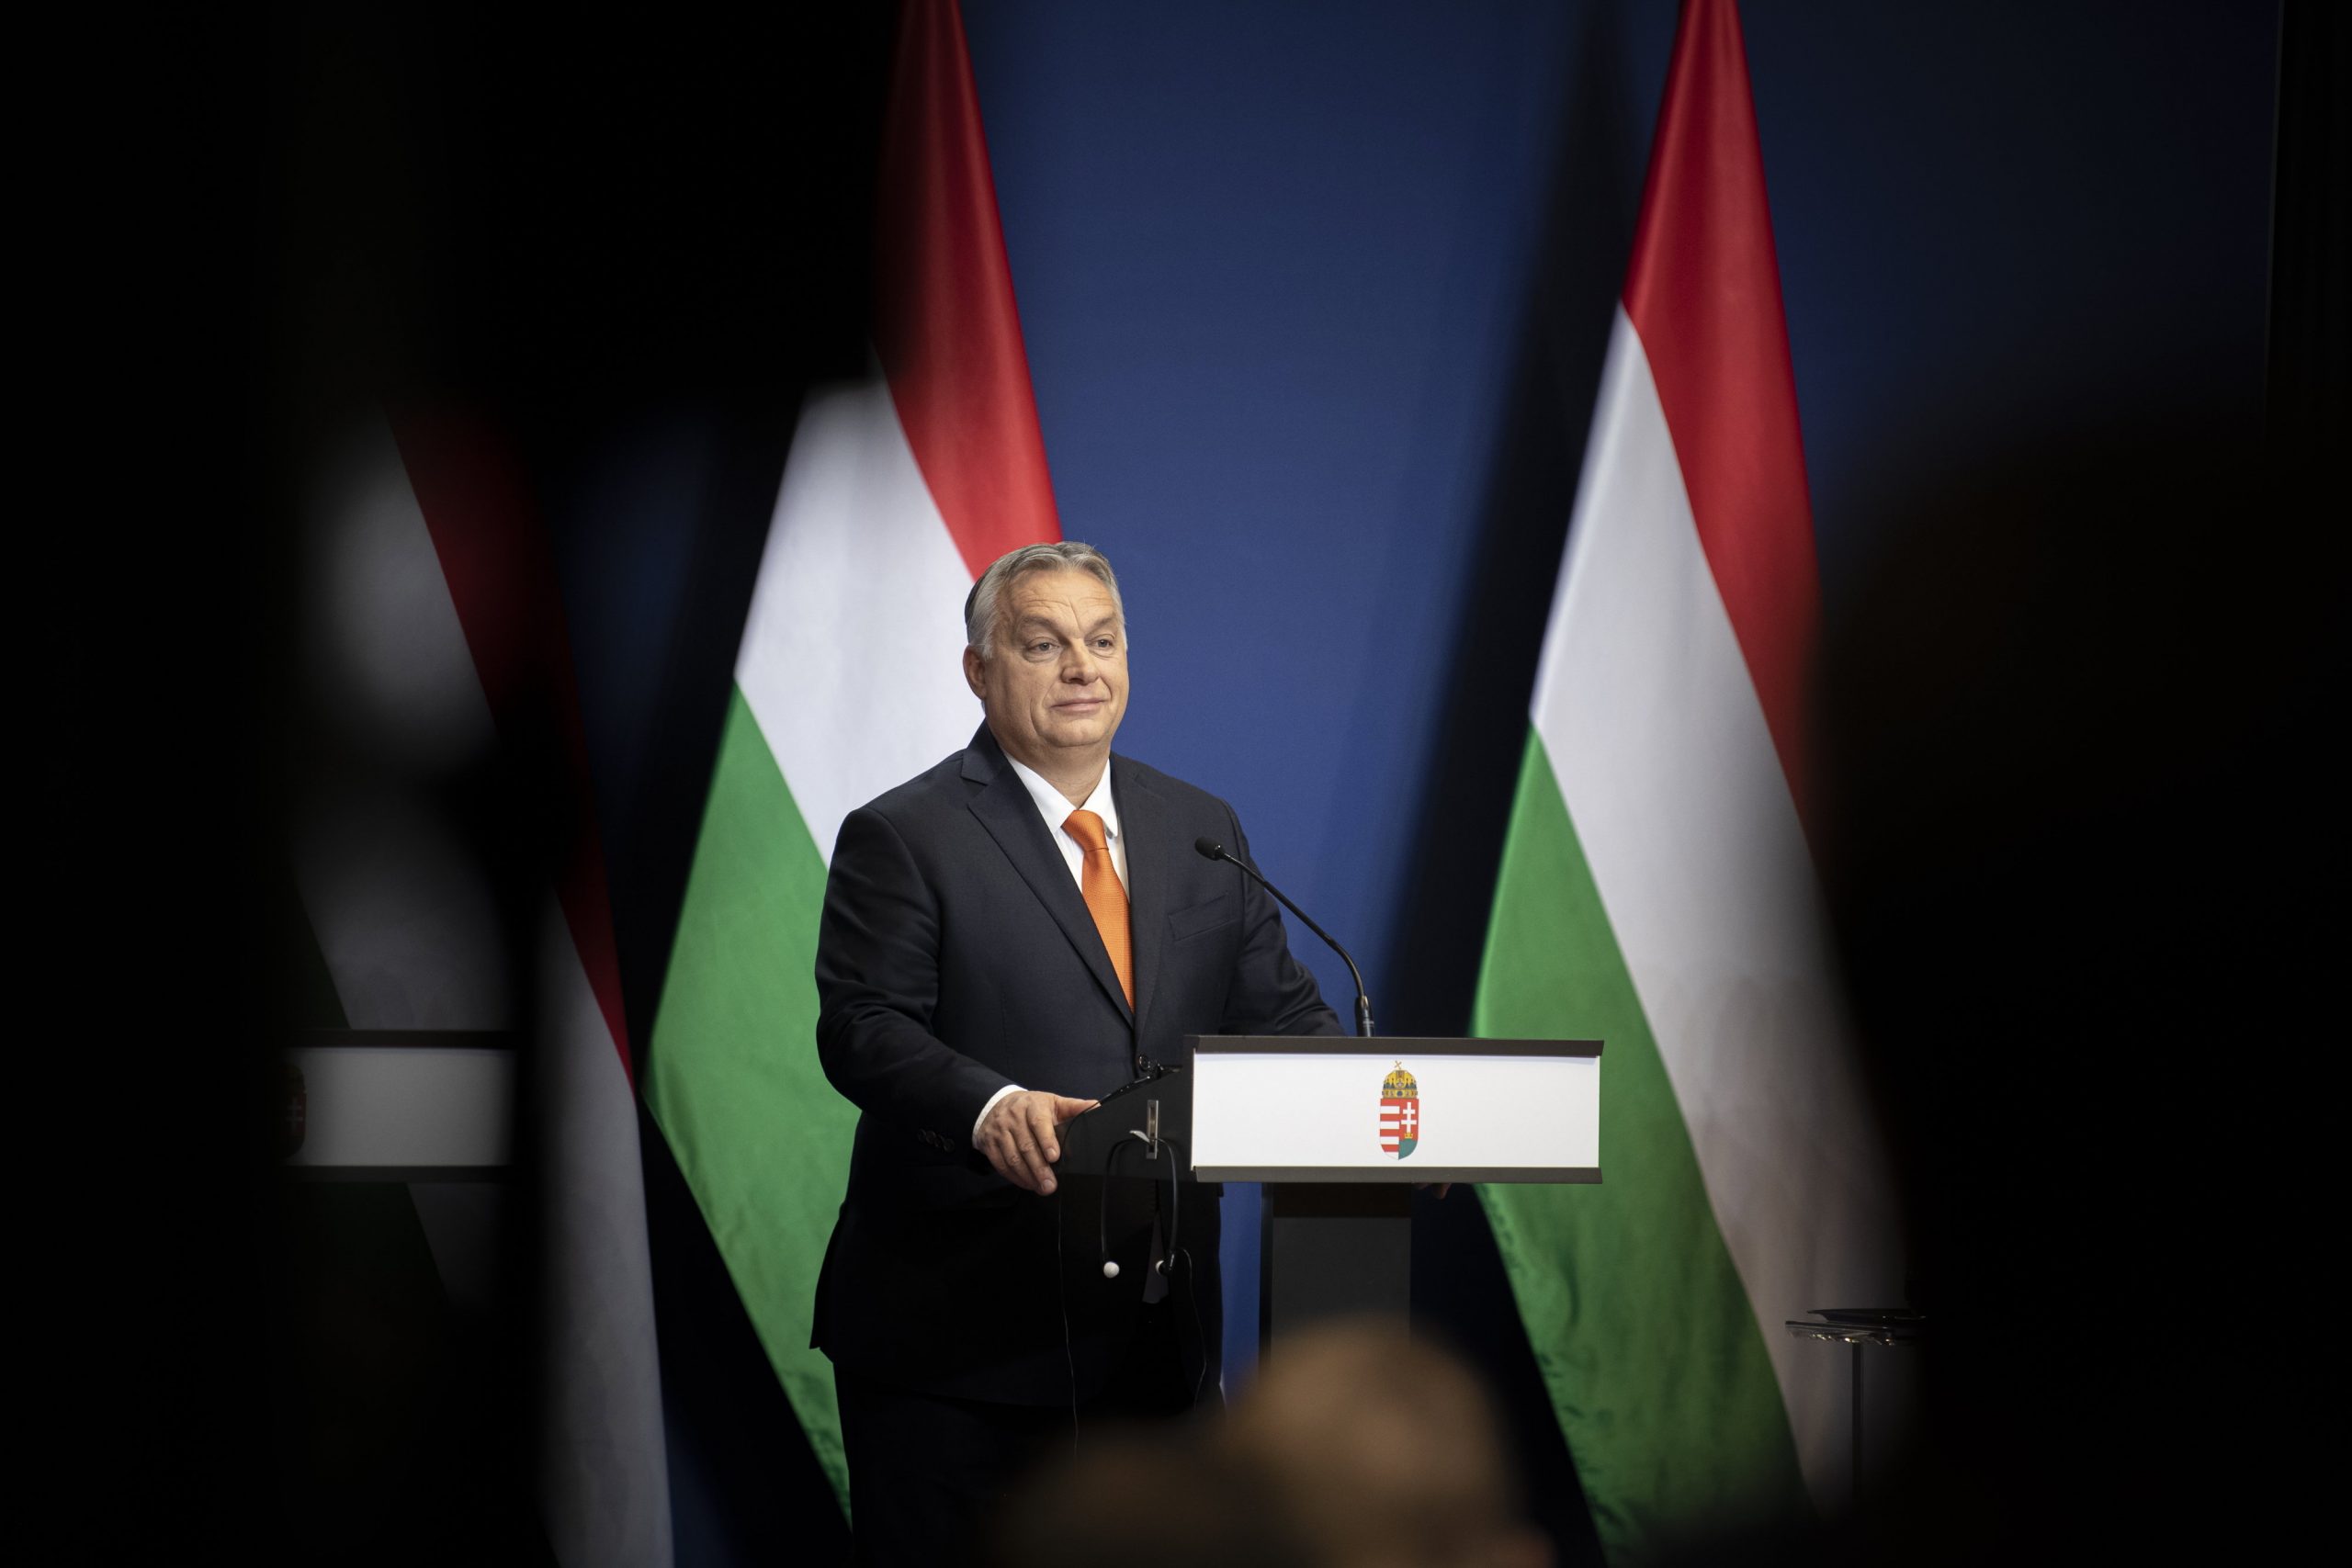 PM Orbán: Hungary Stands by Border Protection Practices